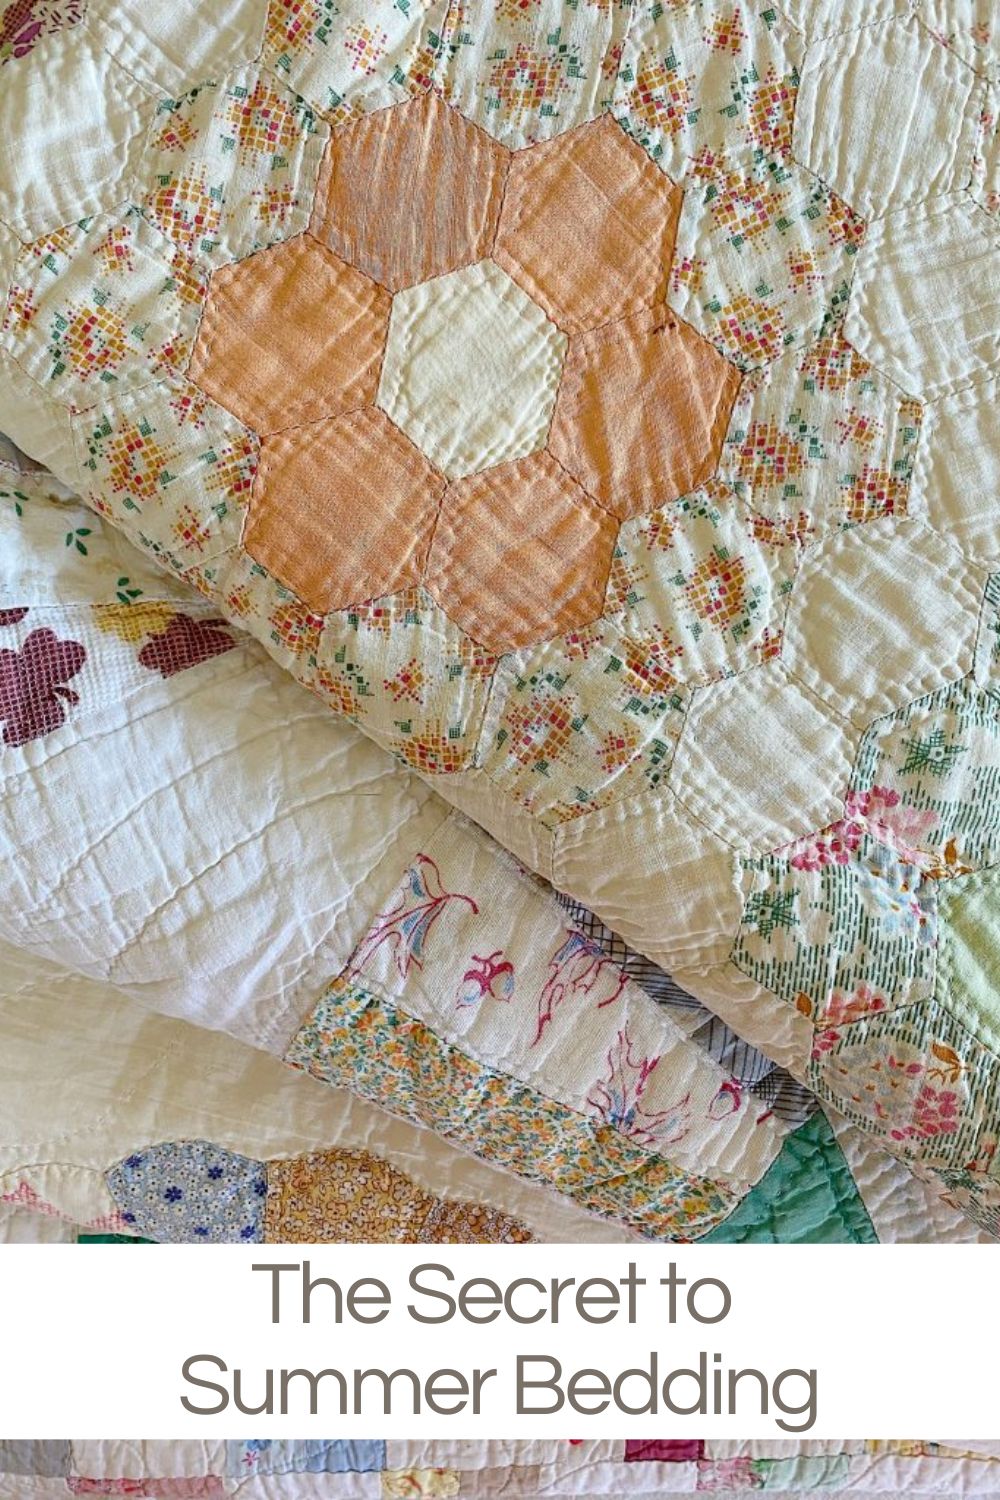 Summer nights are tough as we all struggle between heat and air conditioning. The secret is summer bedding and a vintage quilt.